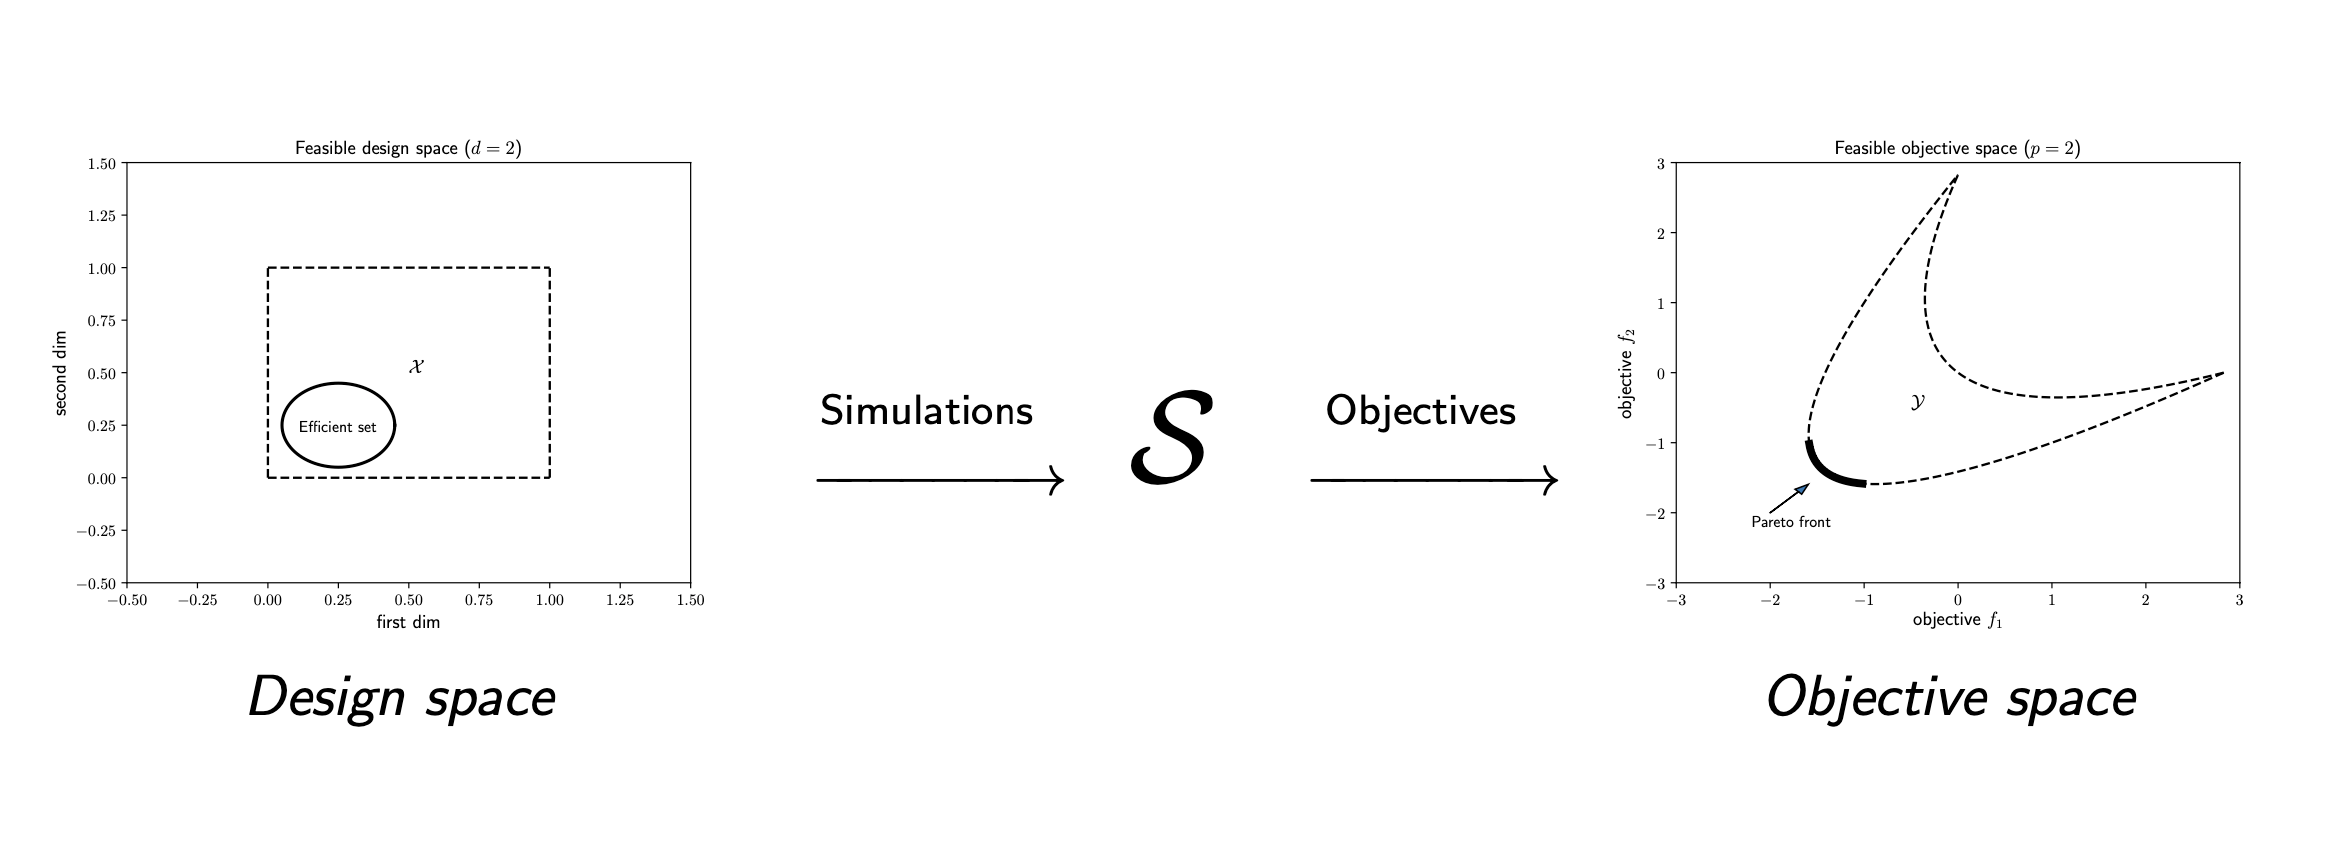 Designs, simulations, and objectives